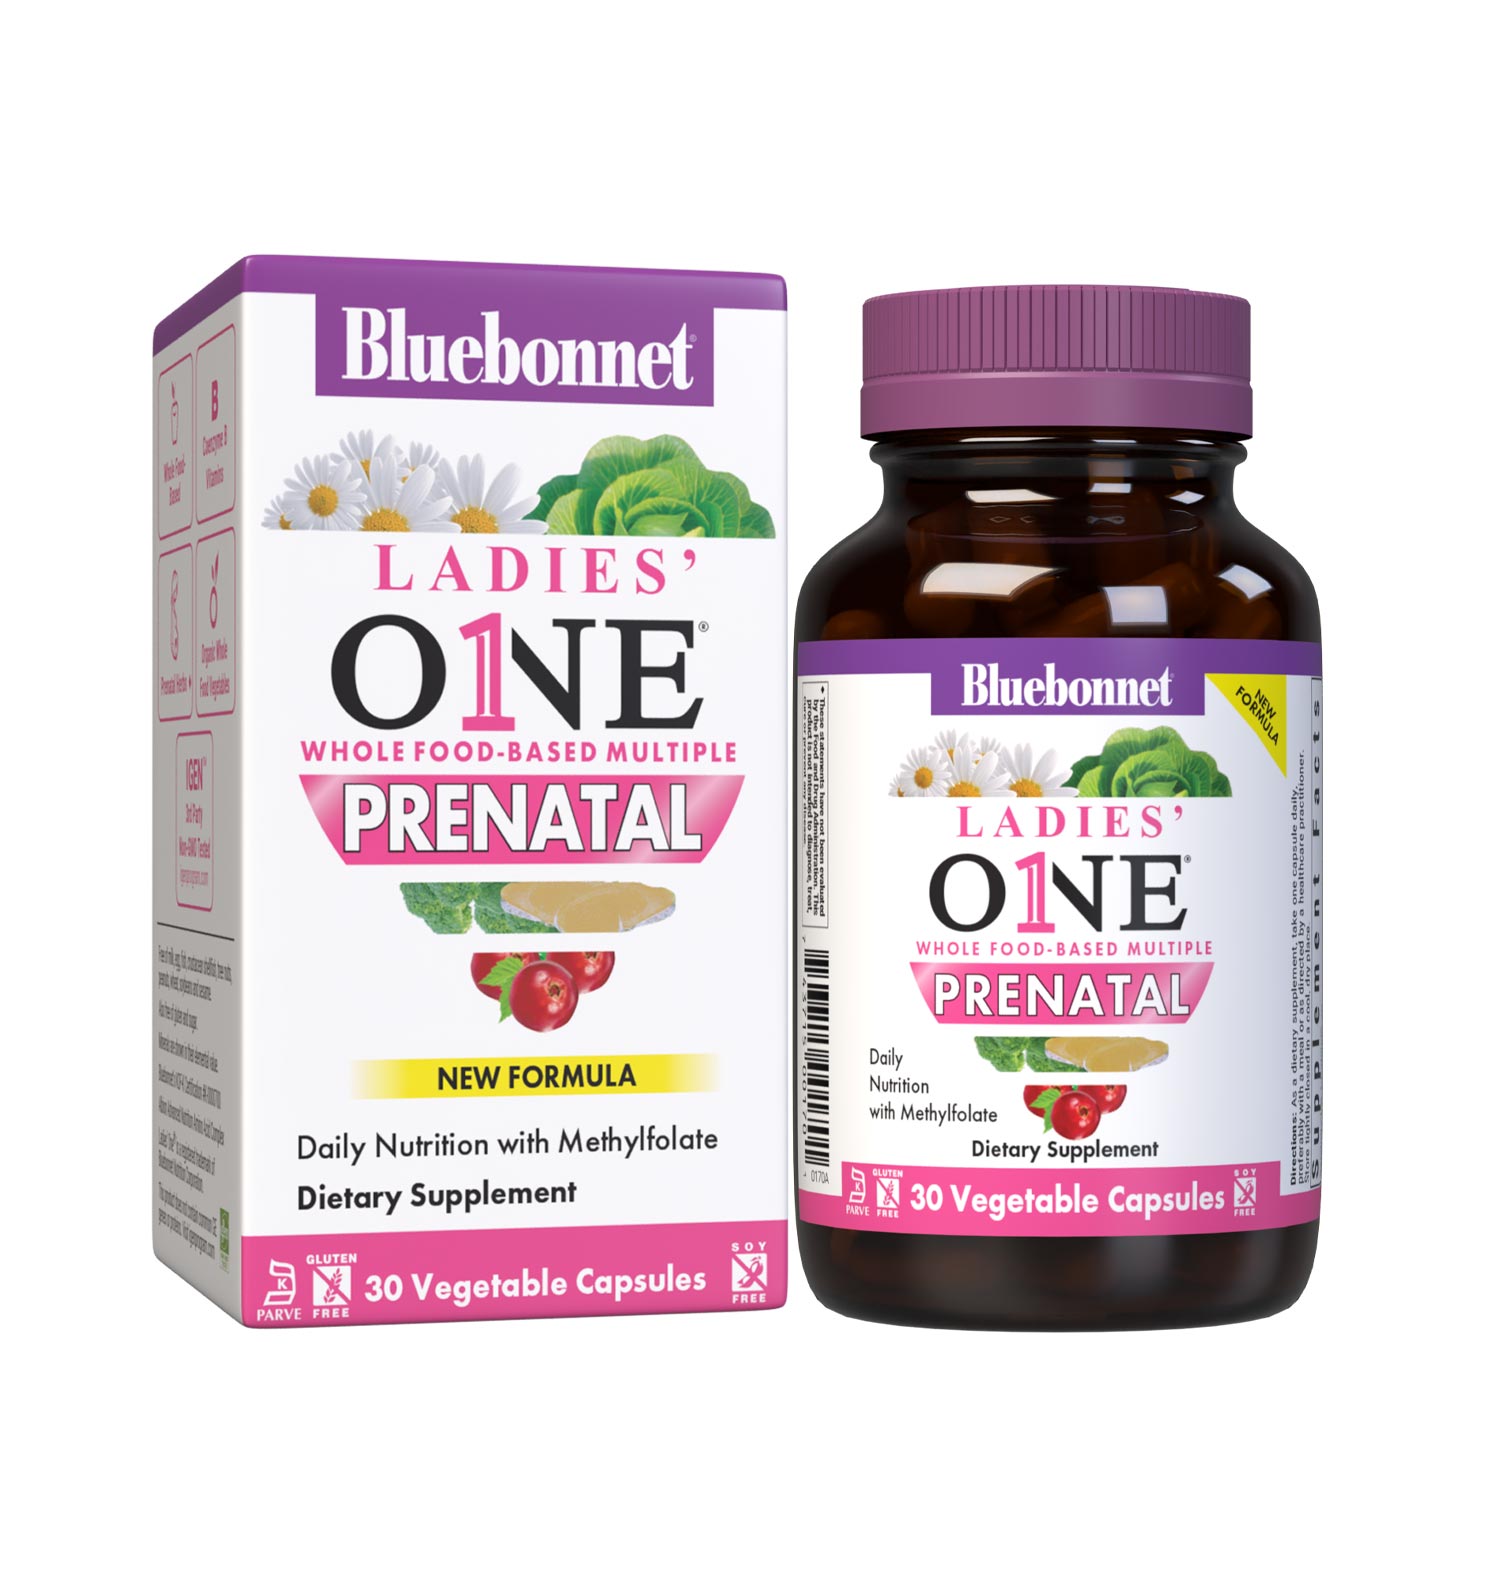 Bluebonnet's Ladies One prenatal whole food-based multiple 30 vegetable capsules is formulated with highly bioavailable non-GMO ingredients such as active coenzyme forms of B vitamins, vitamin K2, vitamin E from sunflower along with sustainably harvested and wildcrafted herbs, superfruits and vegetables. Bottle with box image. #size_30 count